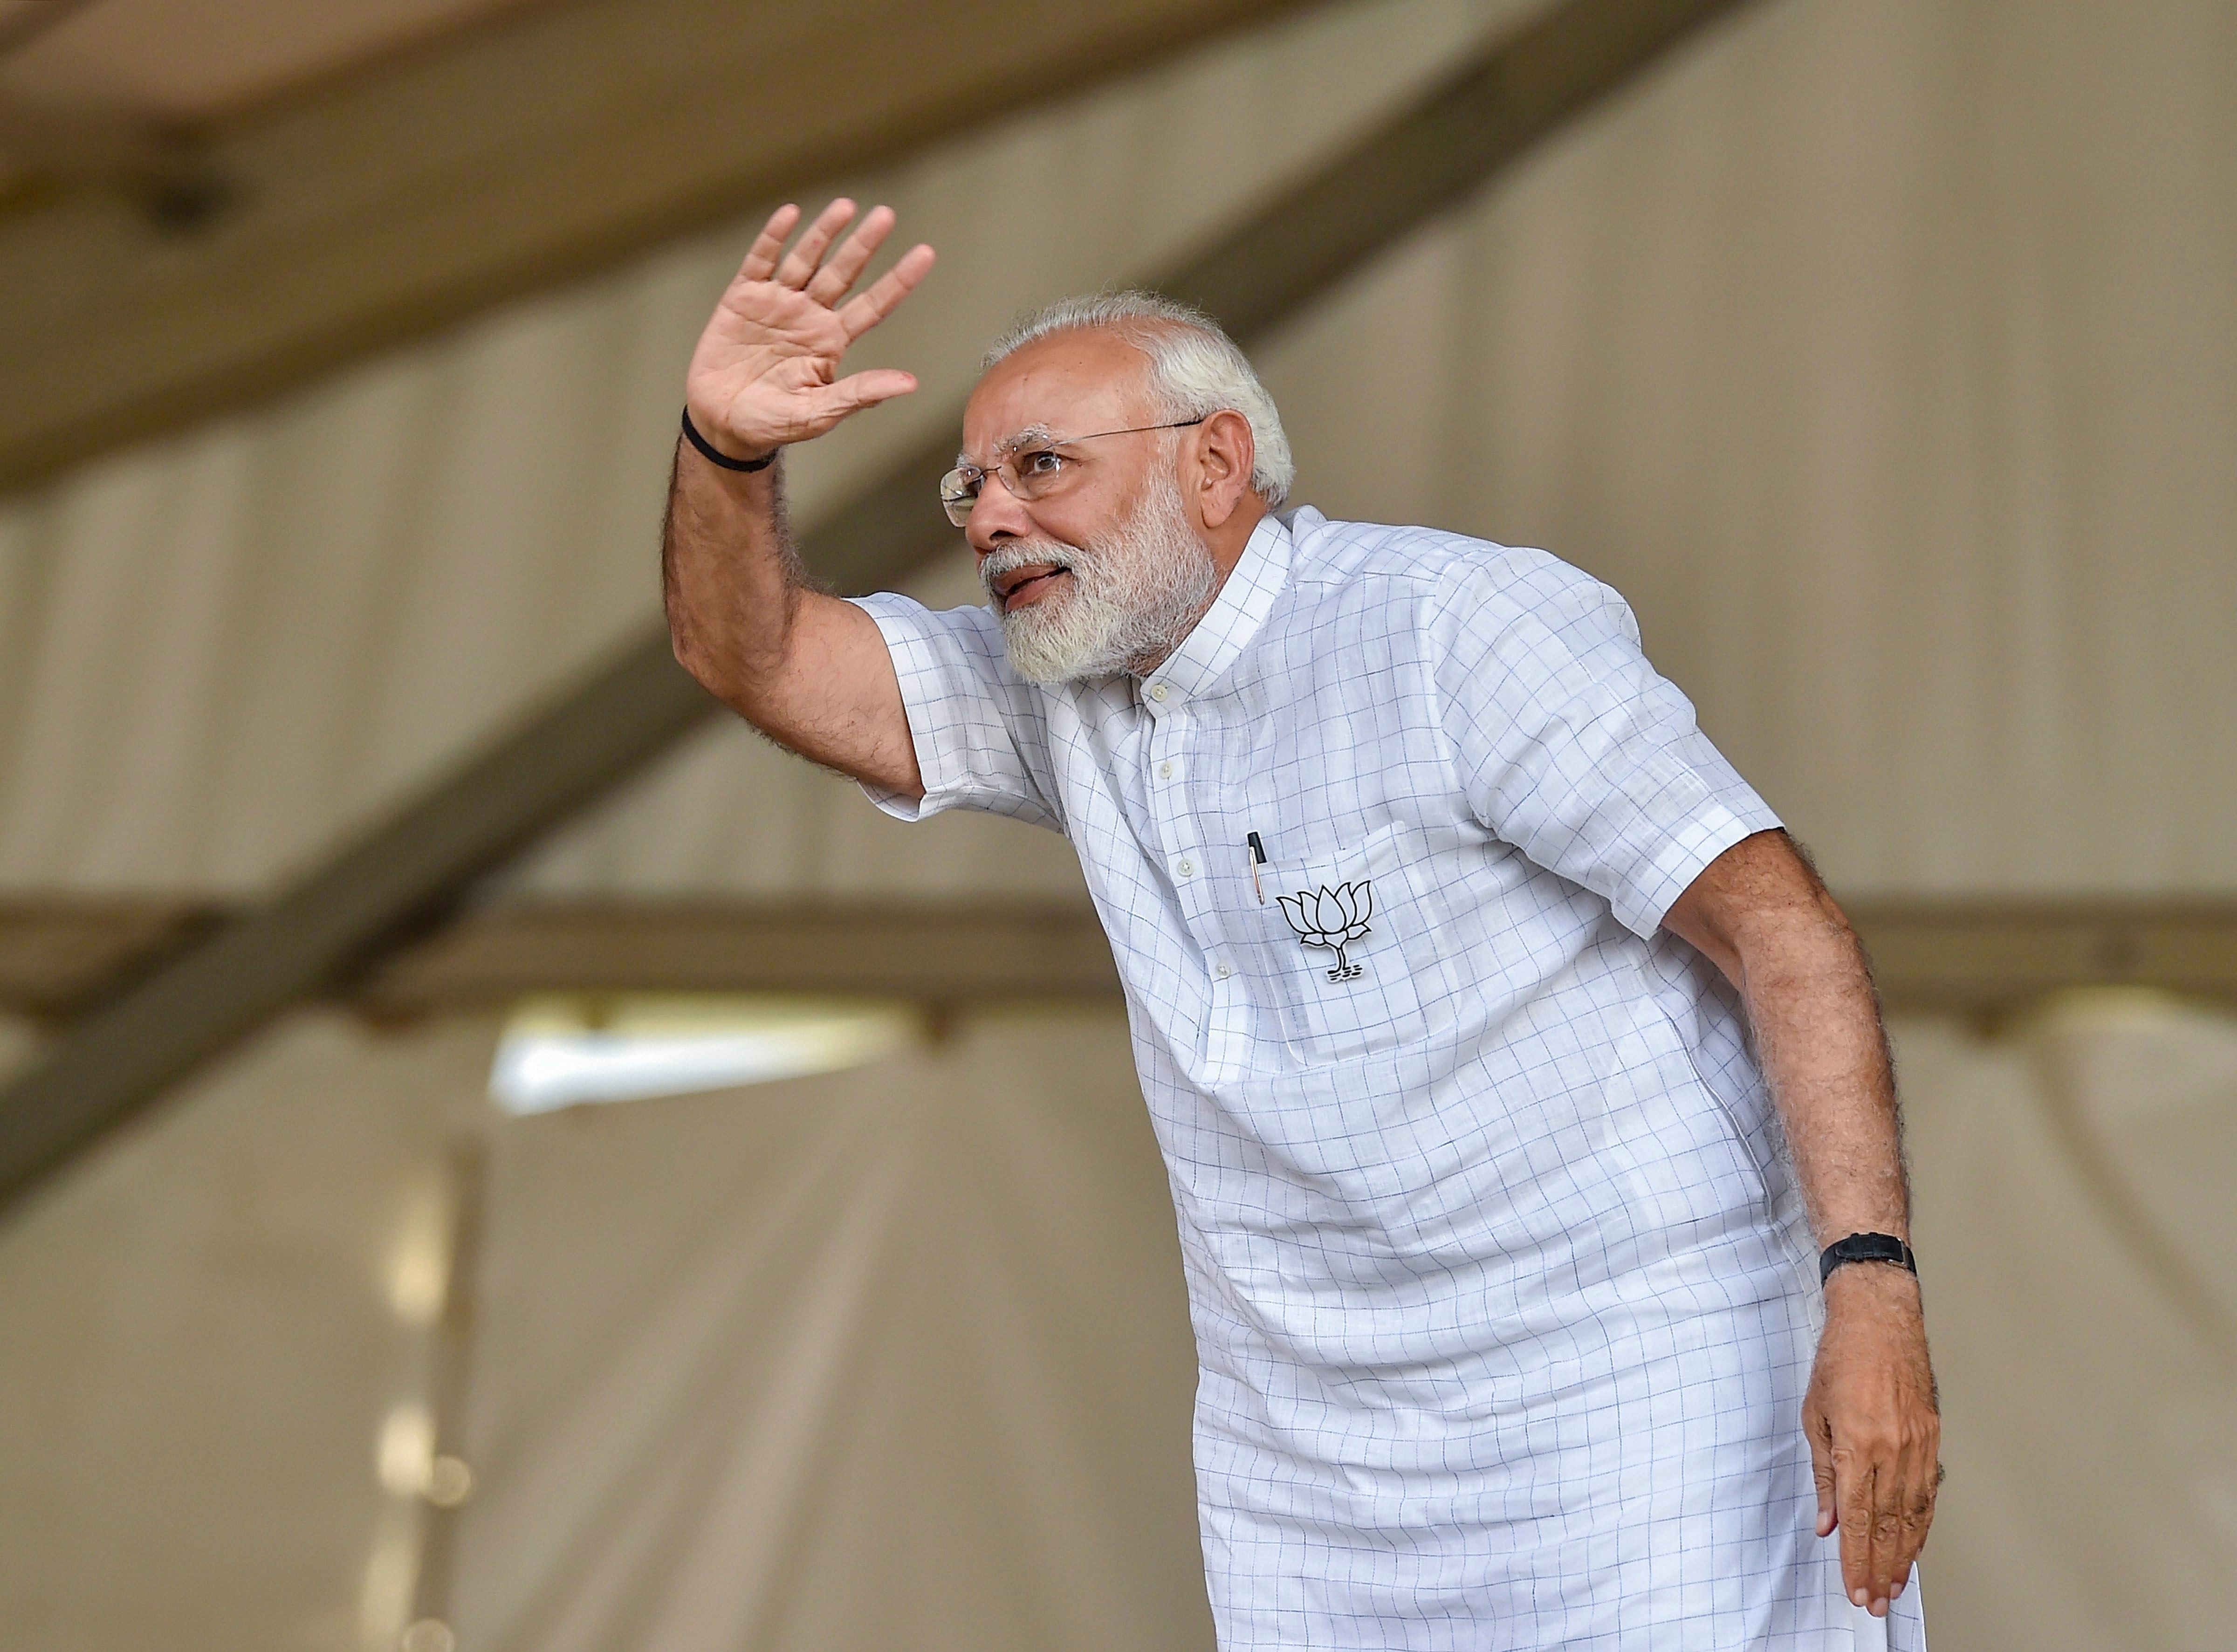 As per the earlier itinerary, Modi was scheduled to spend Saturday night at the Raj Bhavan here, he said. (PTI Photo)